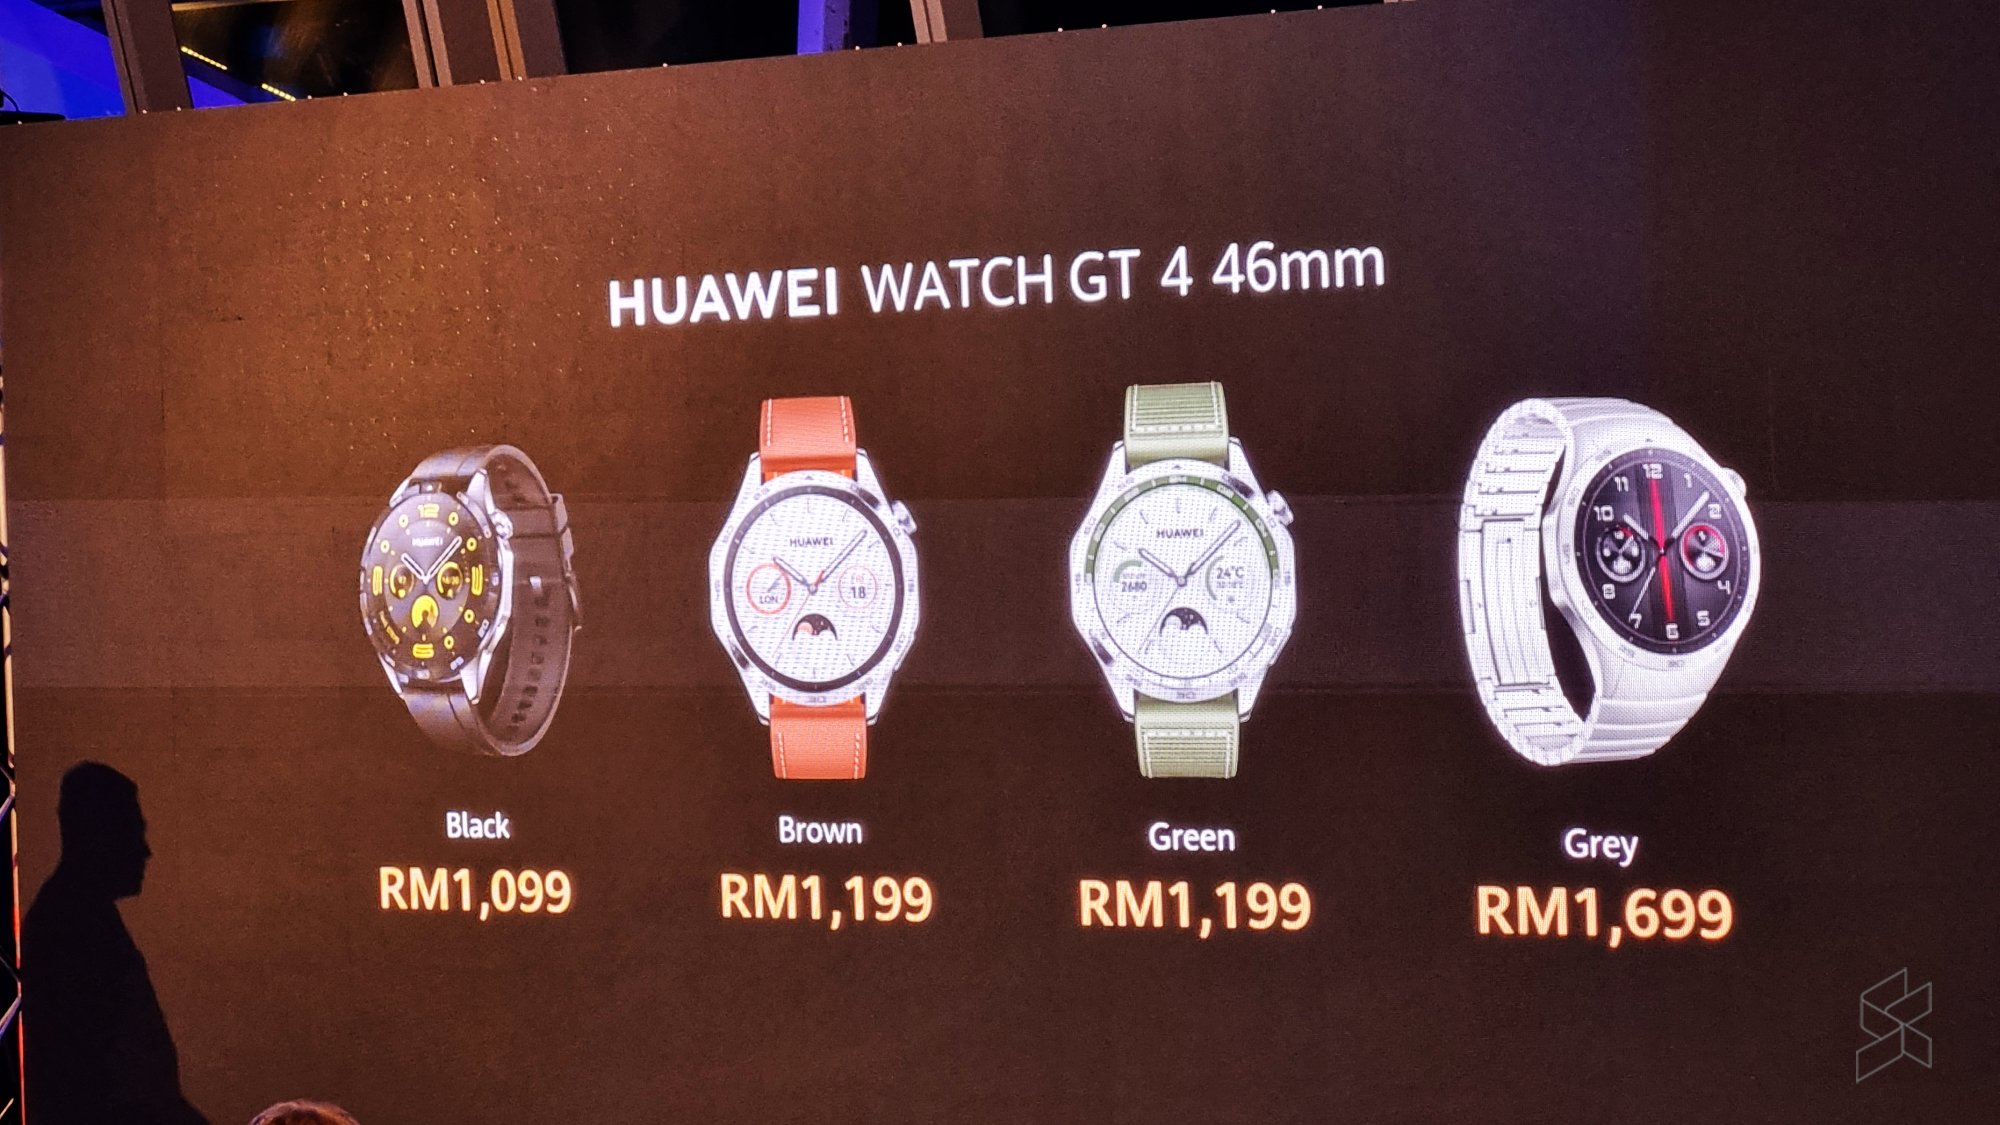 Introducing HUAWEI WATCH FIT and FreeBuds SE2 Wearable and Audio Technology